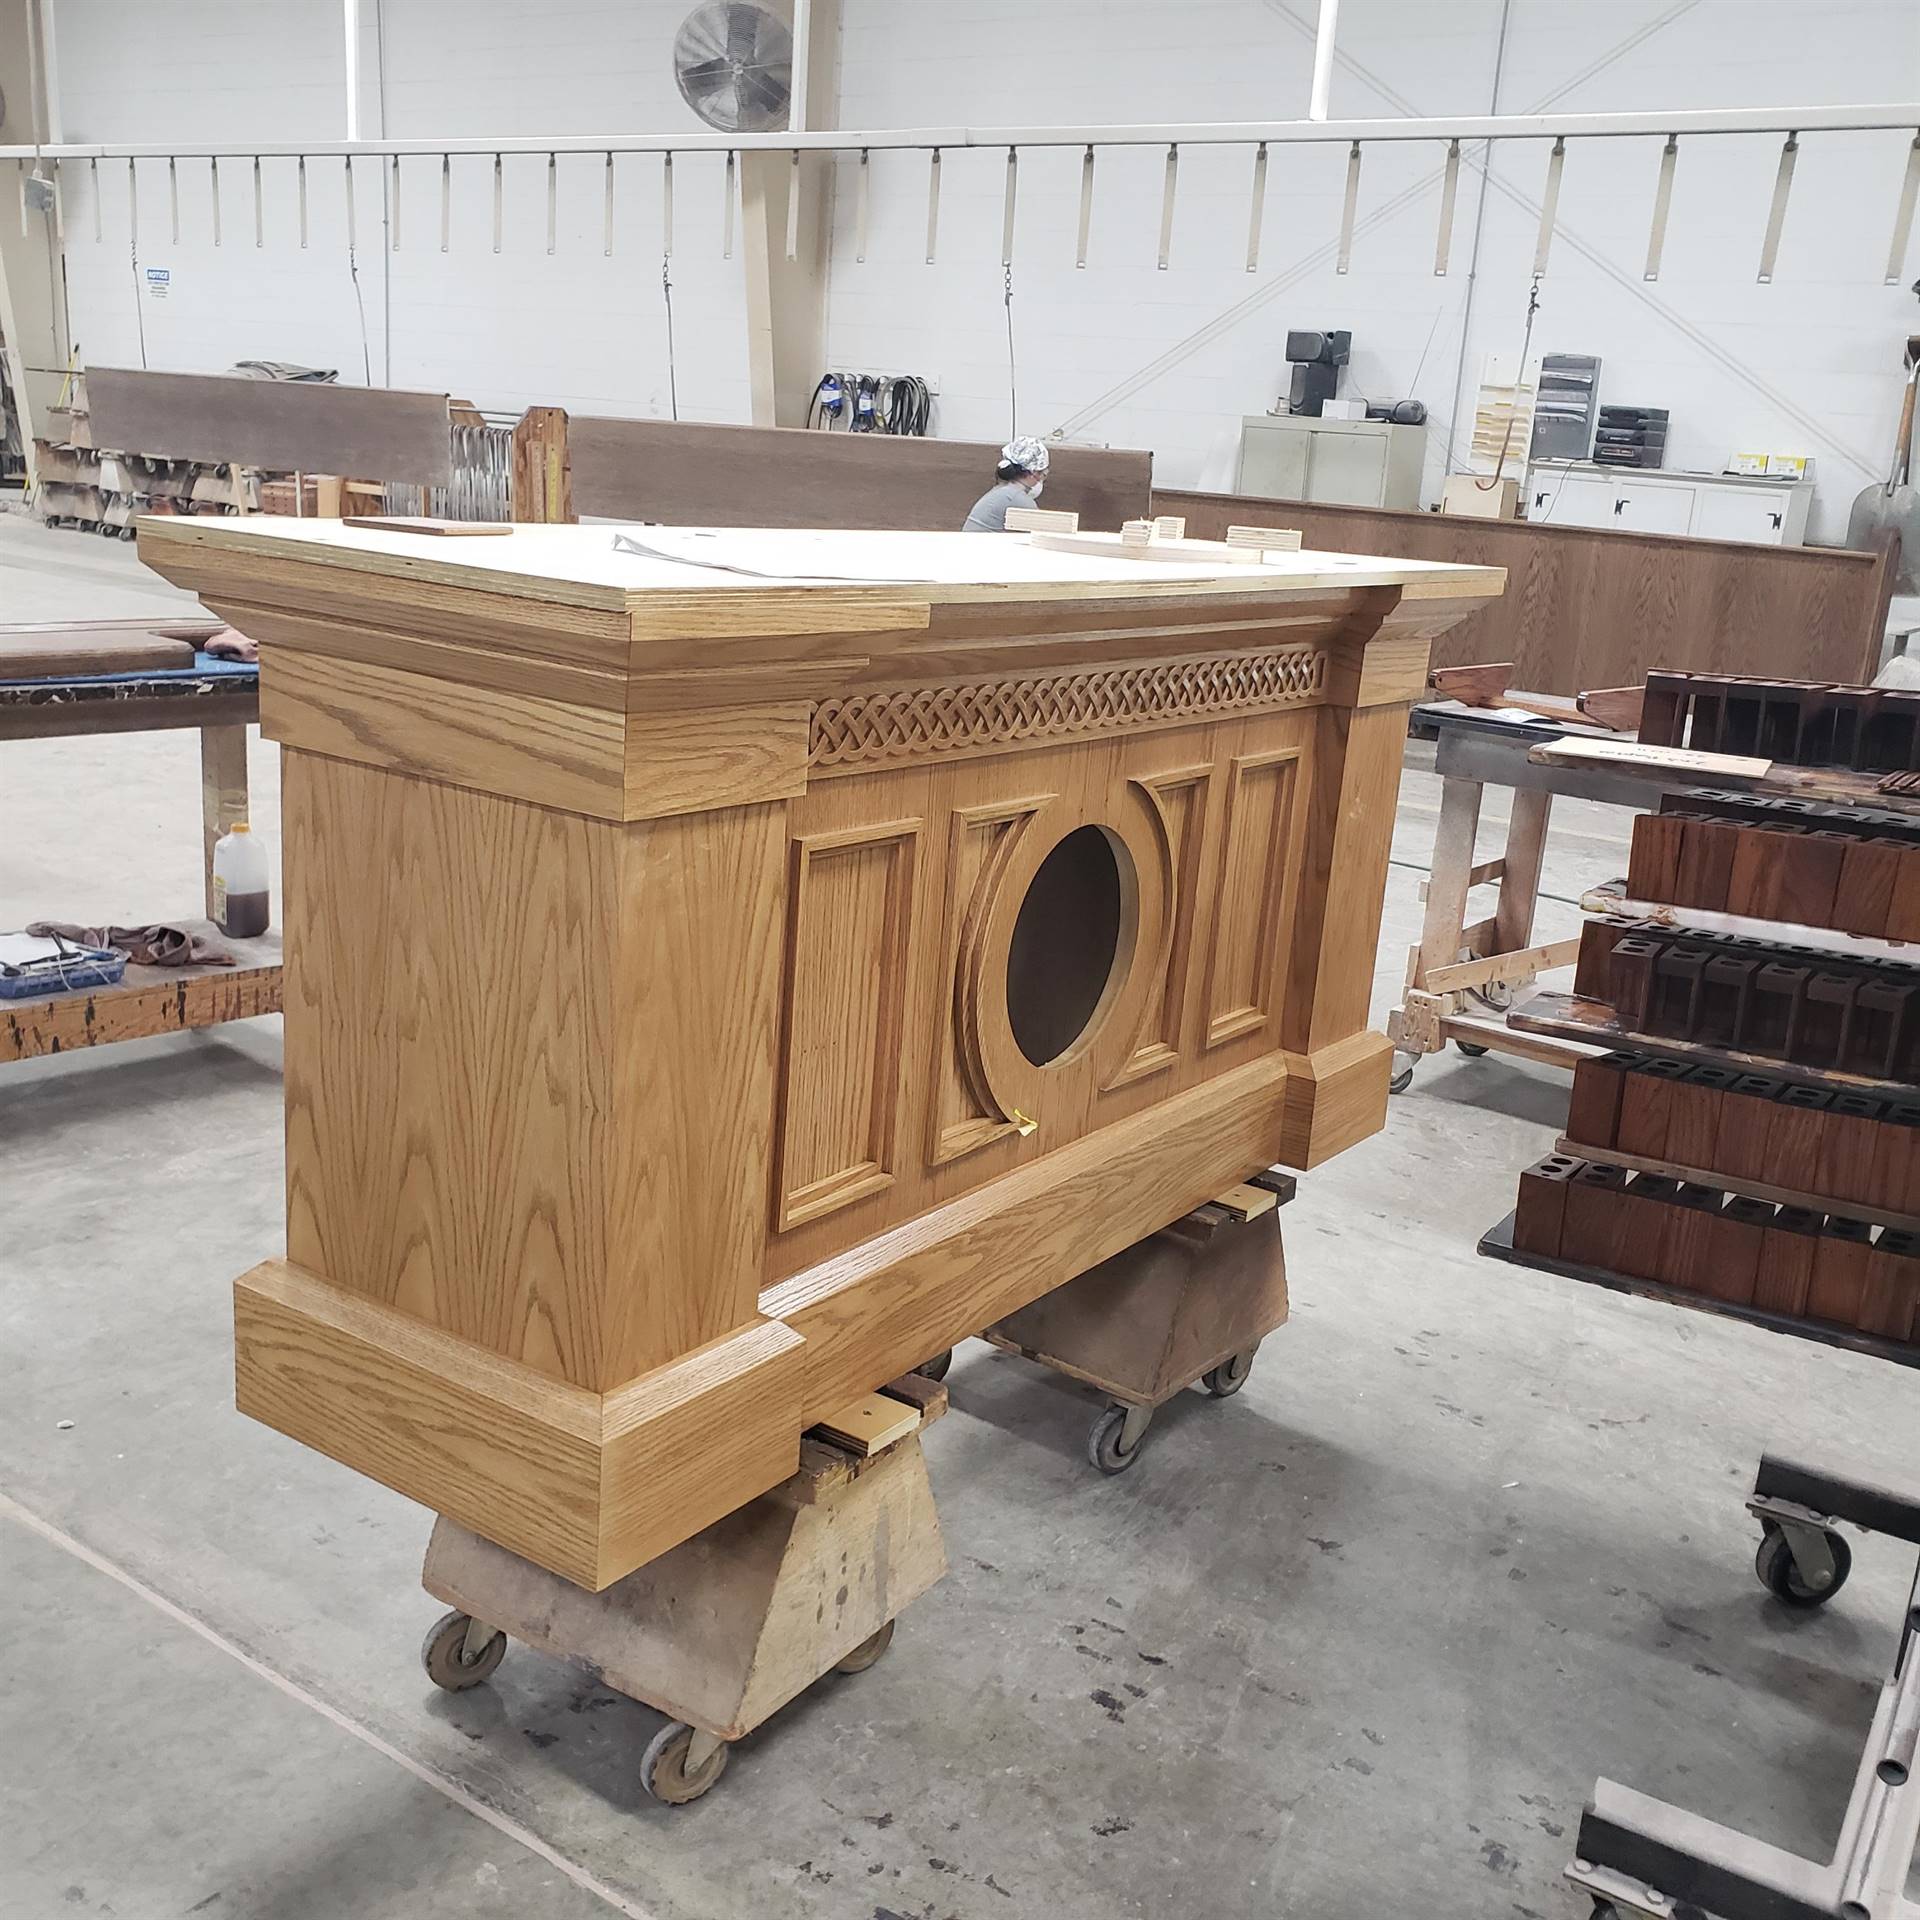 *the new altar being built